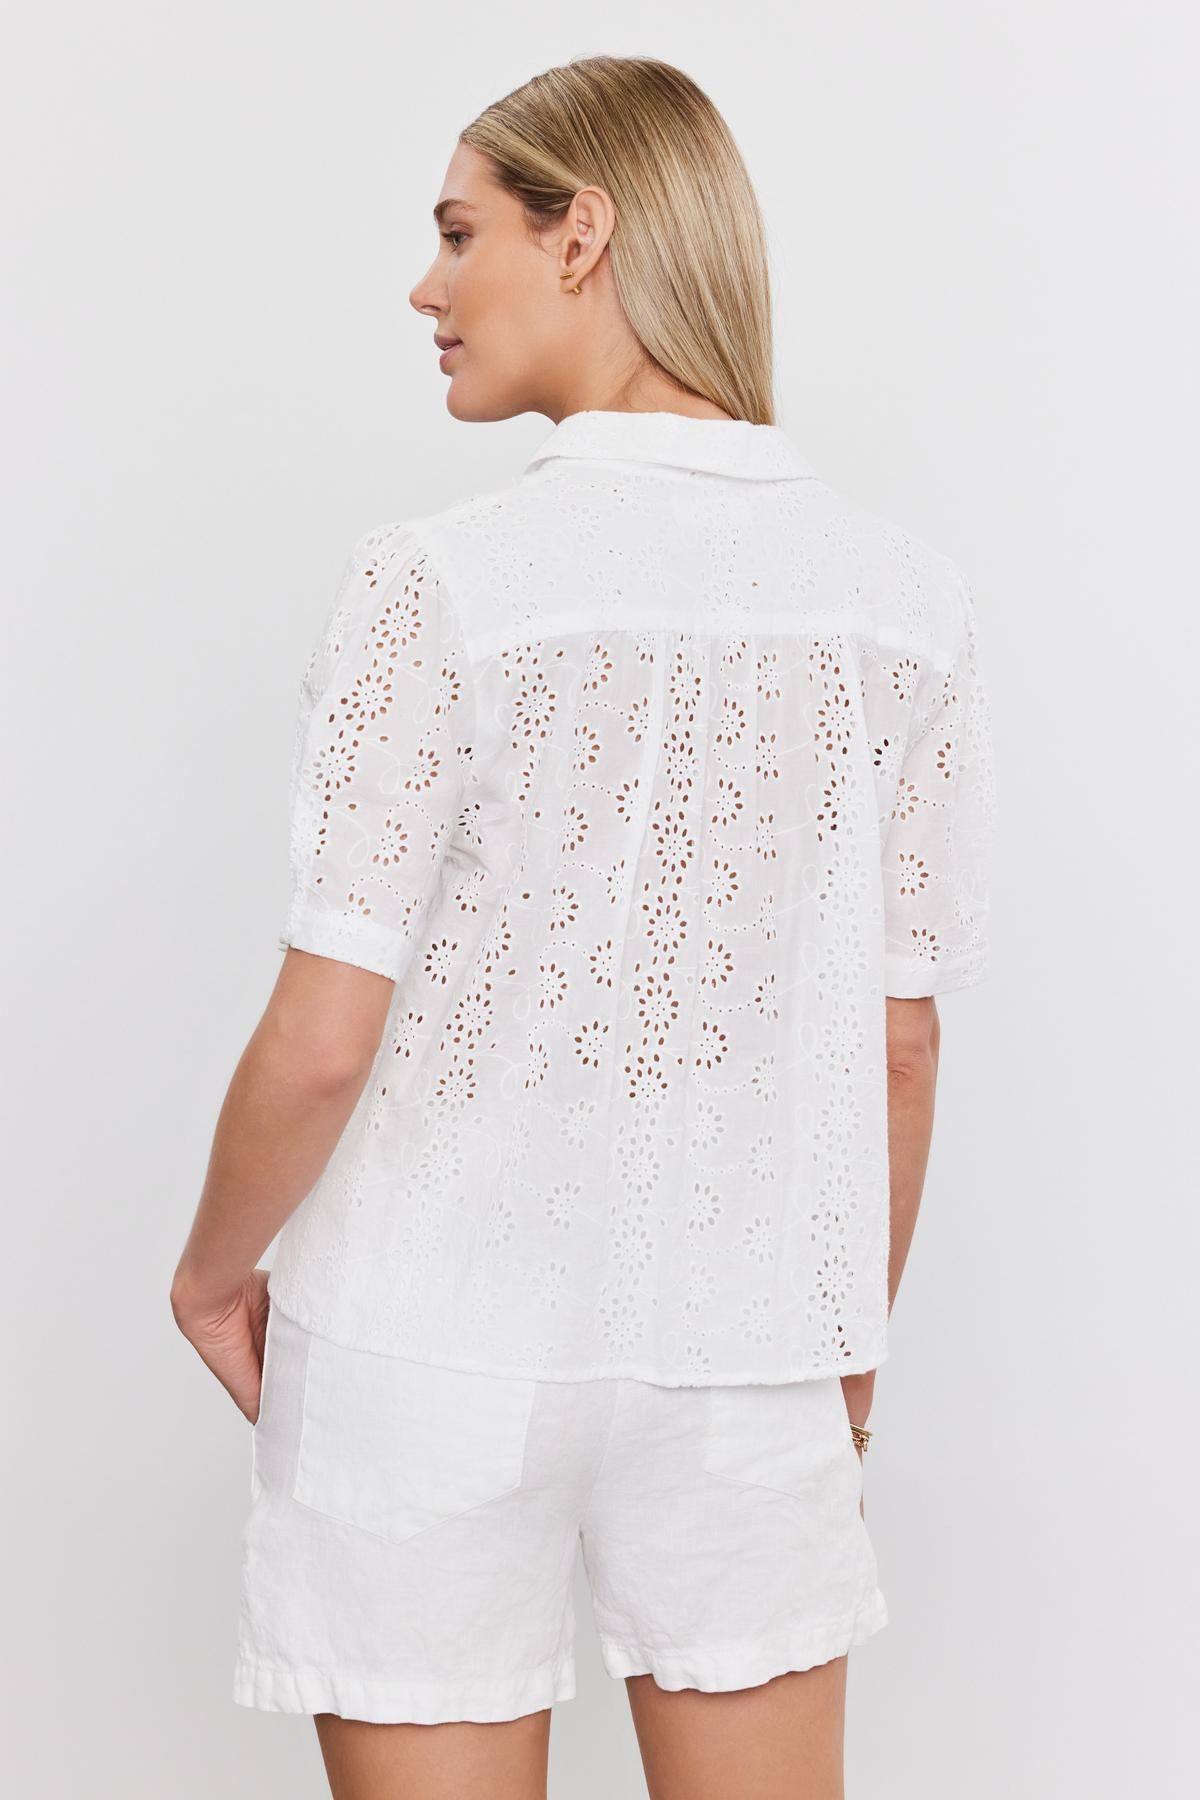   A woman from behind wearing a white, short-sleeved, cotton Olivia blouse with eyelet details and matching shorts, standing against a plain background by Velvet by Graham & Spencer. 